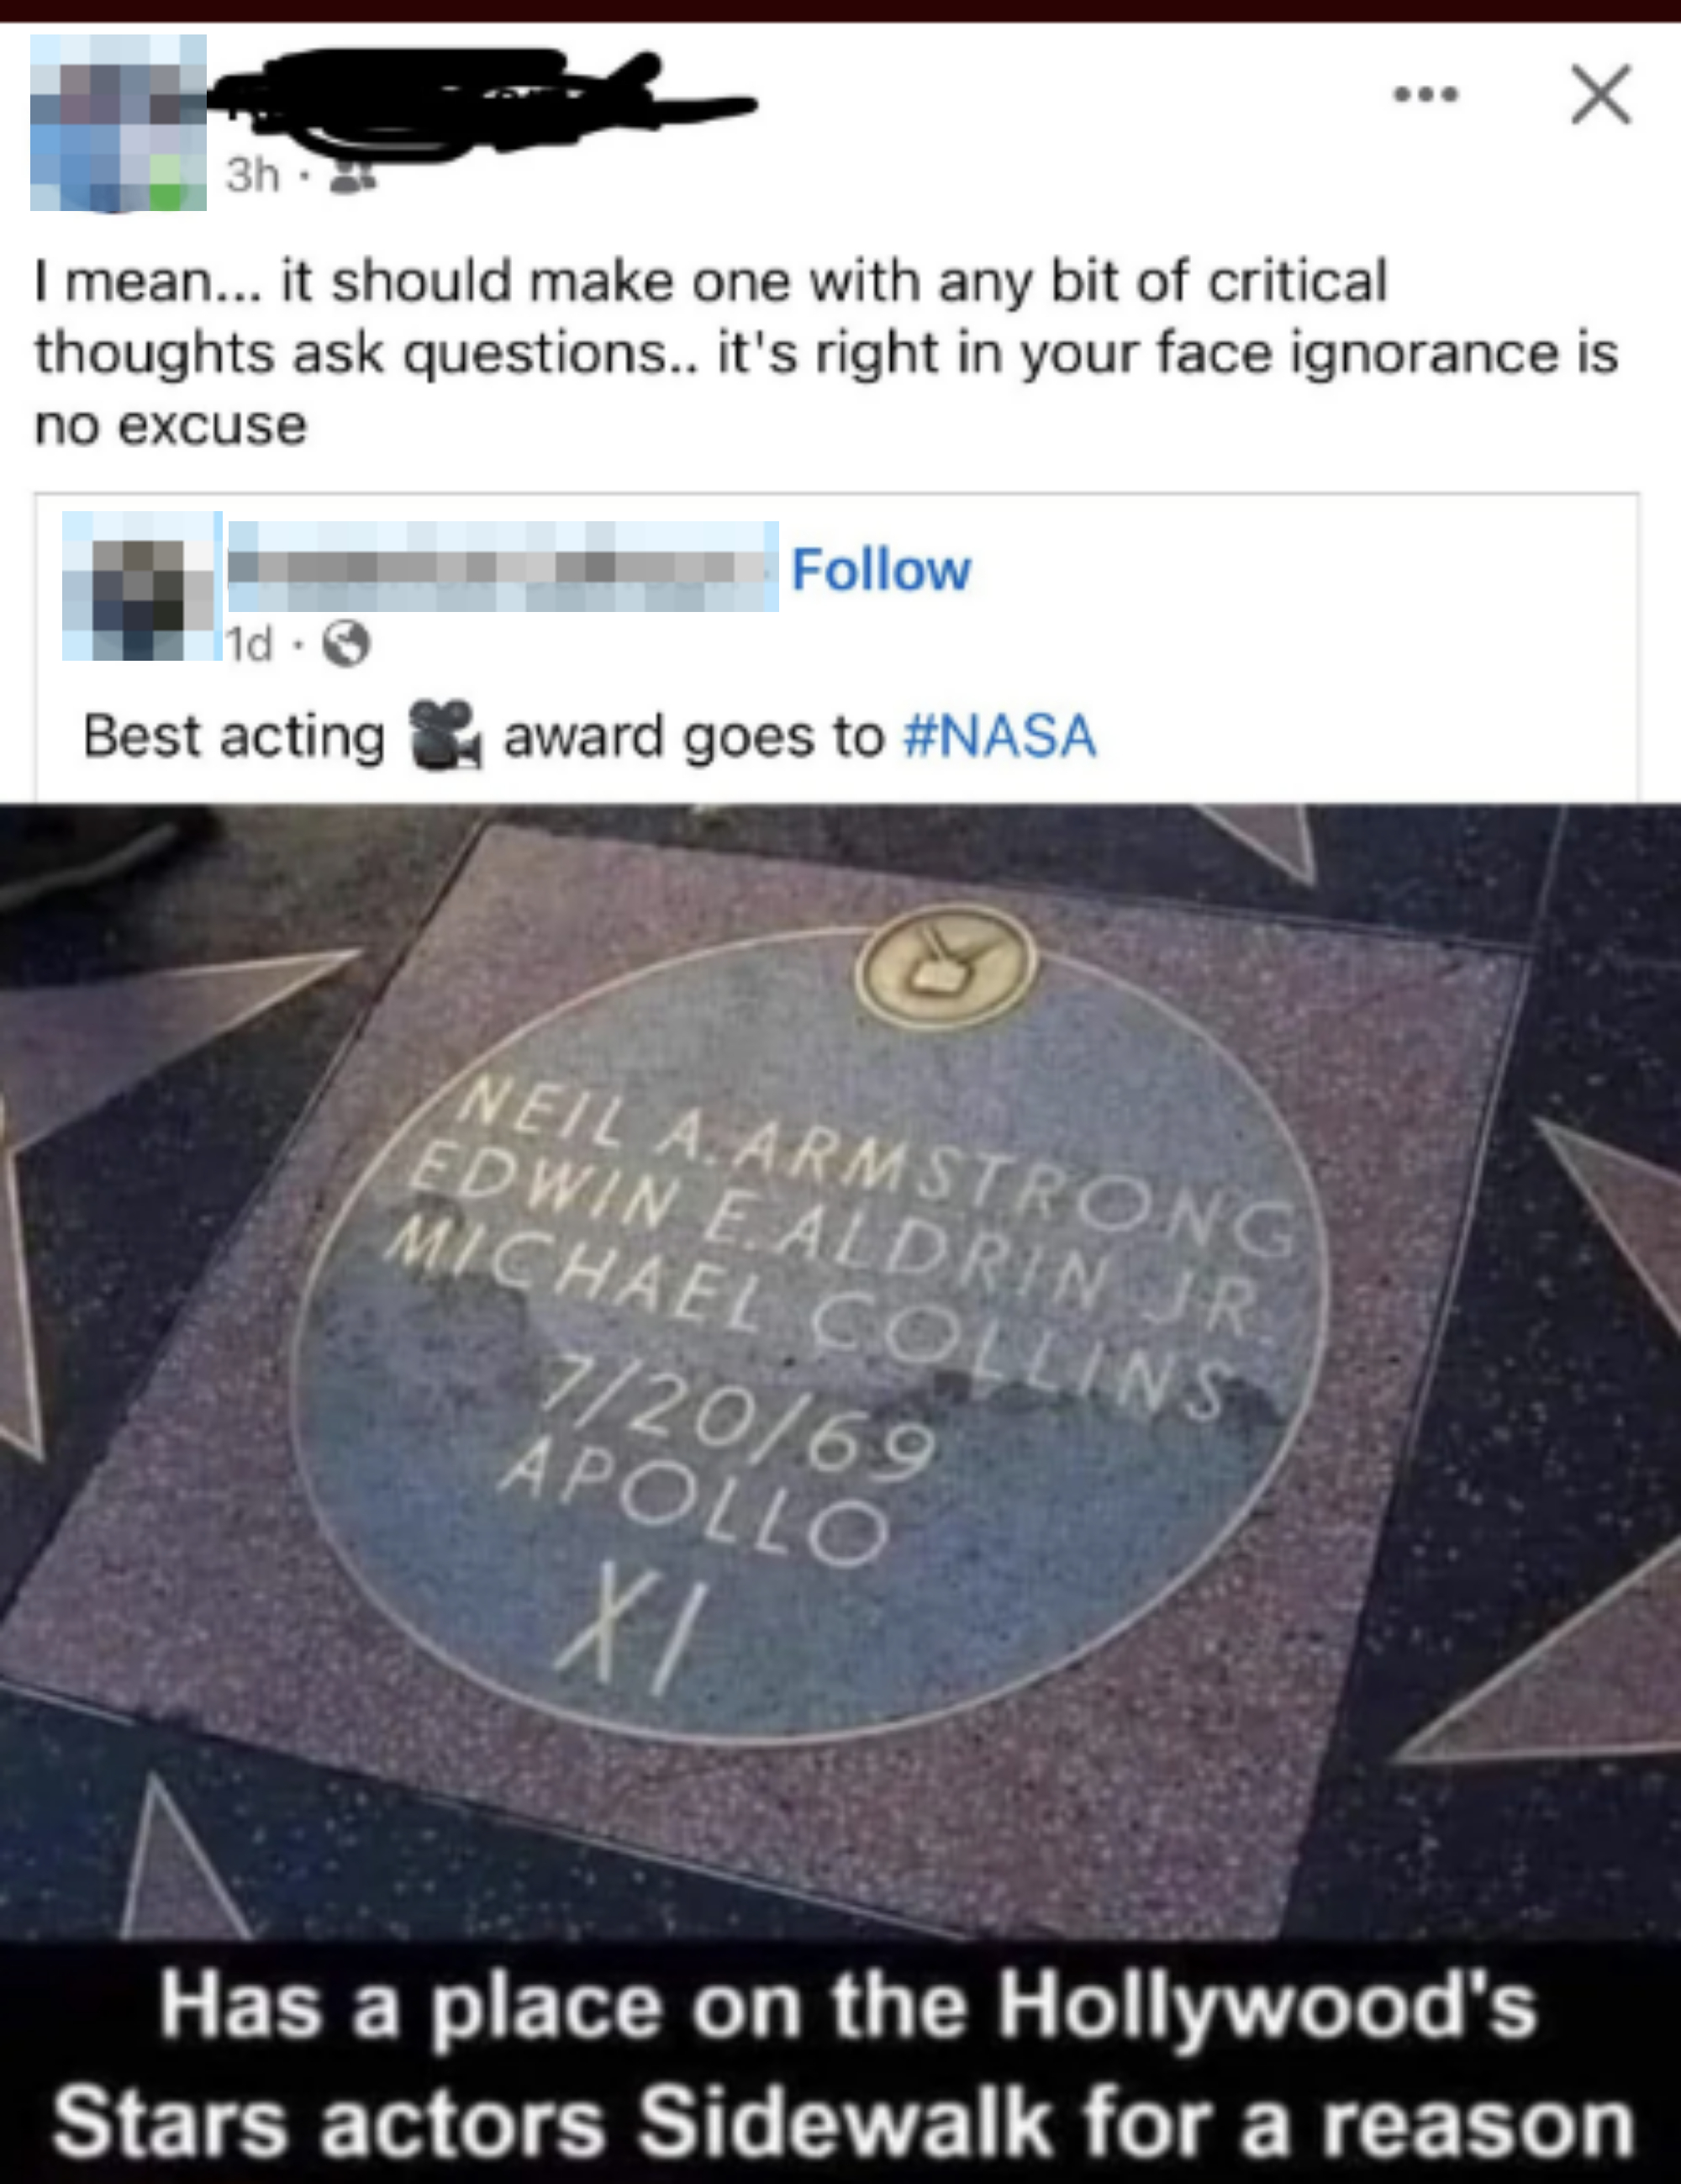 A Facebook post showing Neil A. Armstrong, Edwin E. Aldrin Jr., and Michael Collins&#x27; star on the Hollywood Walk of Fame with a caption praising NASA